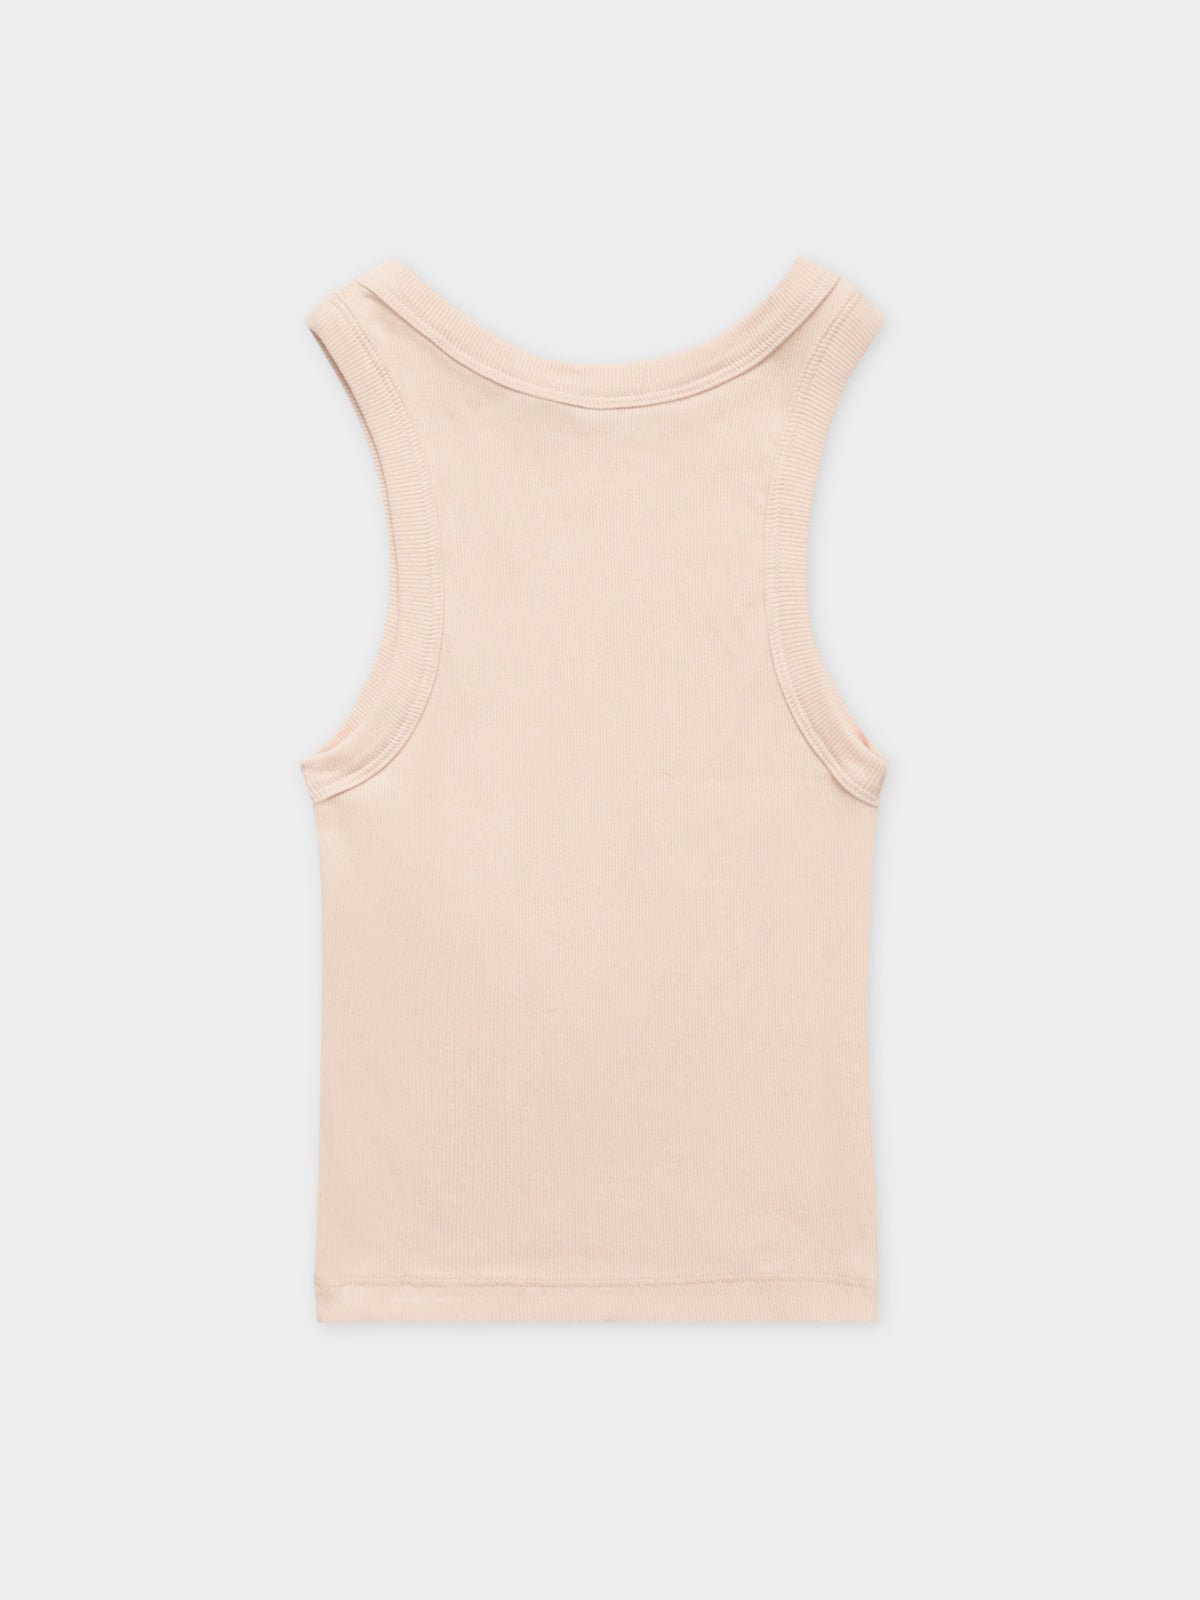 Daisy Tank Top in Pink